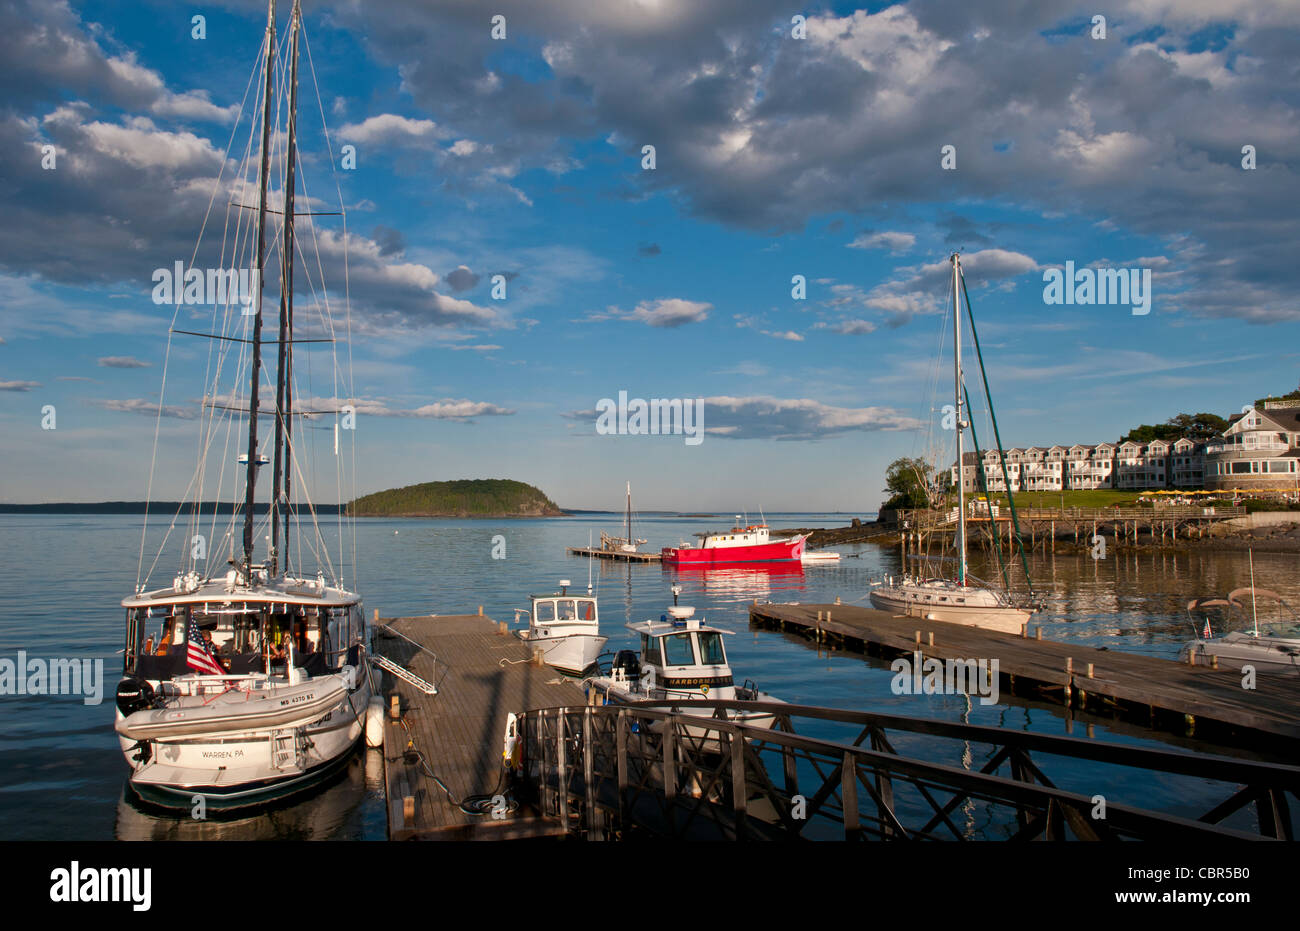 Beautiful Vacation Spot Of Bar Harbor Maine With Water And Ships